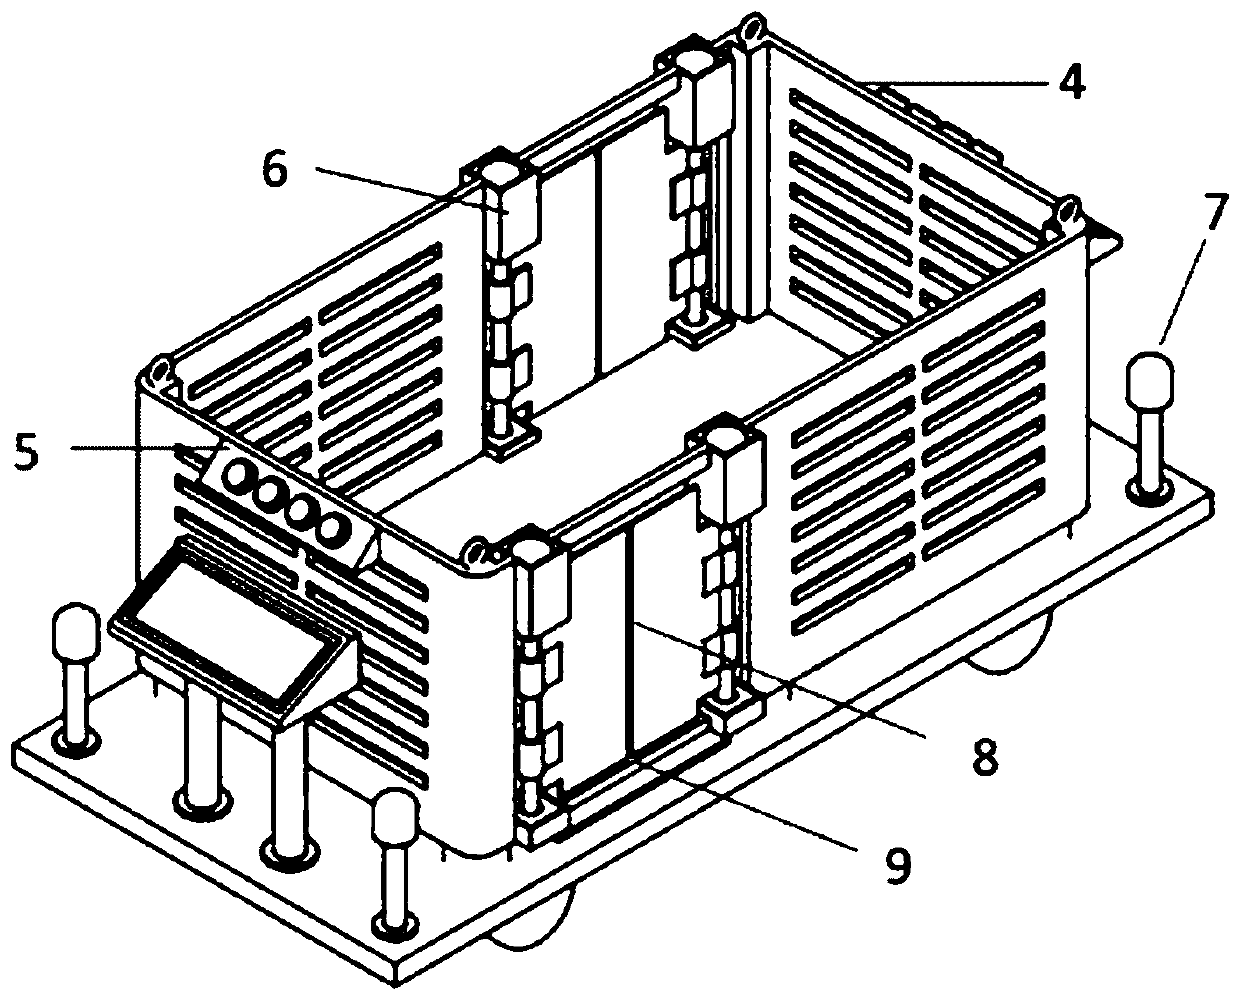 A model animal automatic carrying system and method